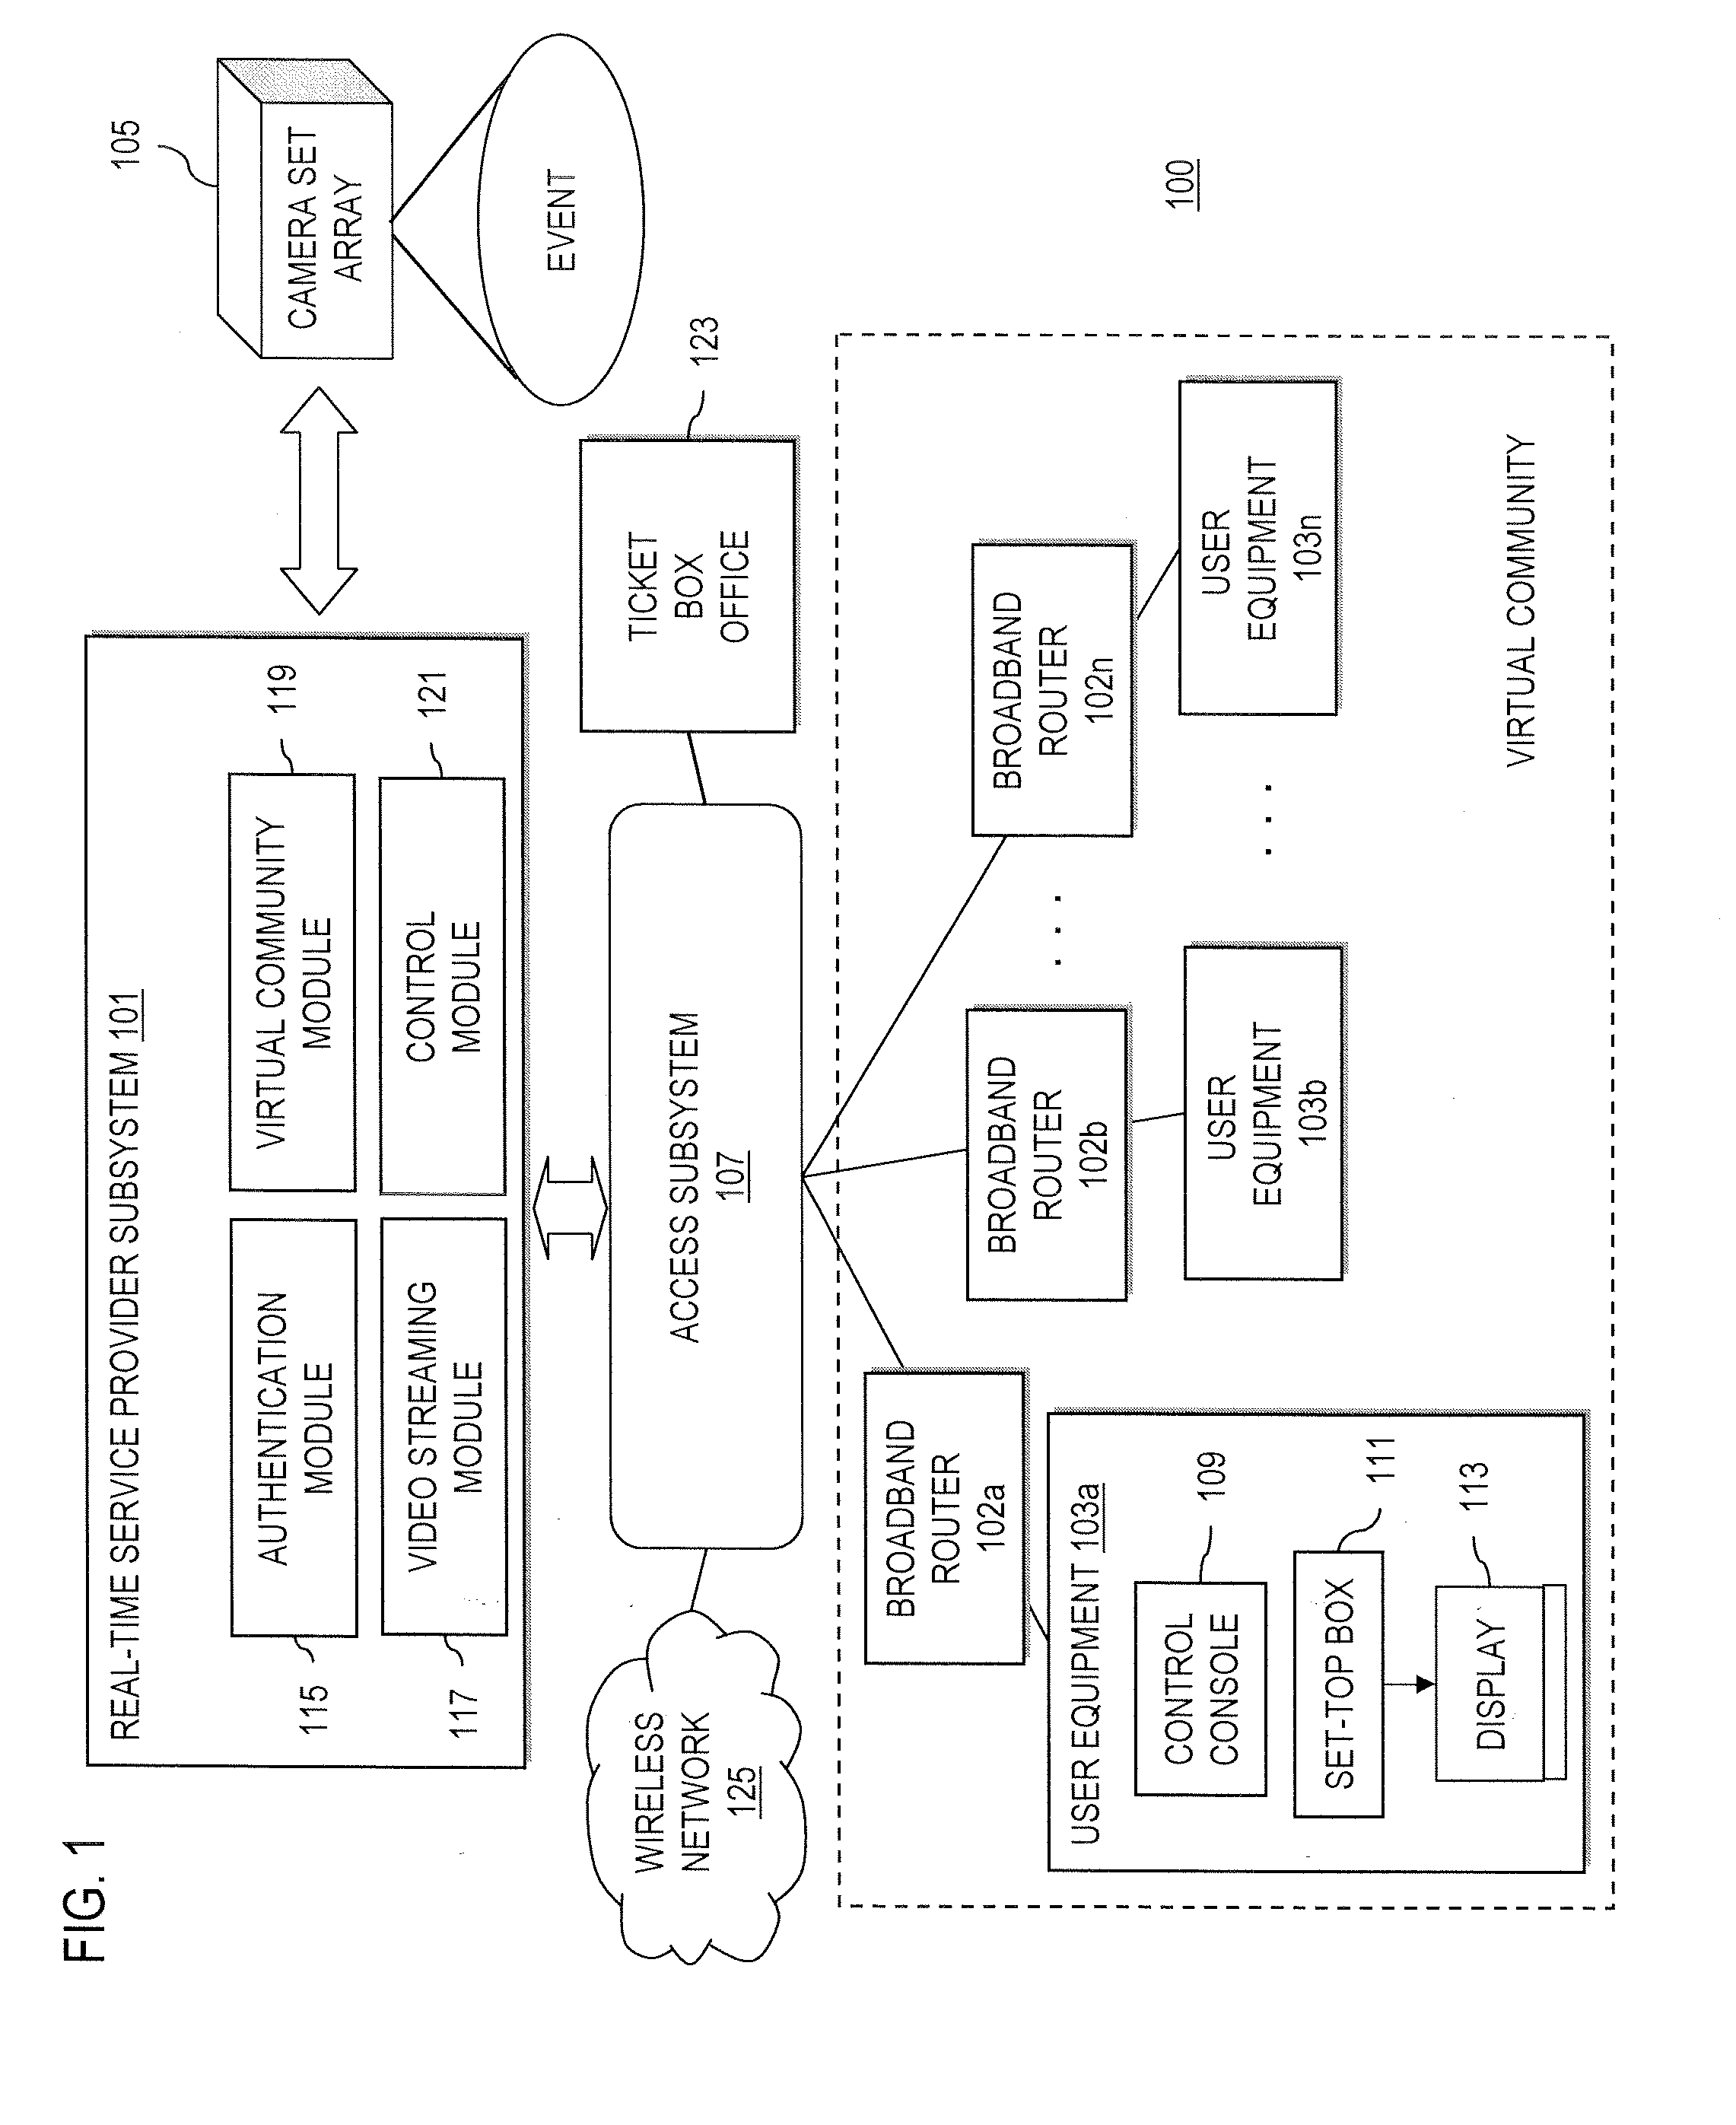 Method and apparatus for participating in a virtual community for viewing a remote event over a wireless network